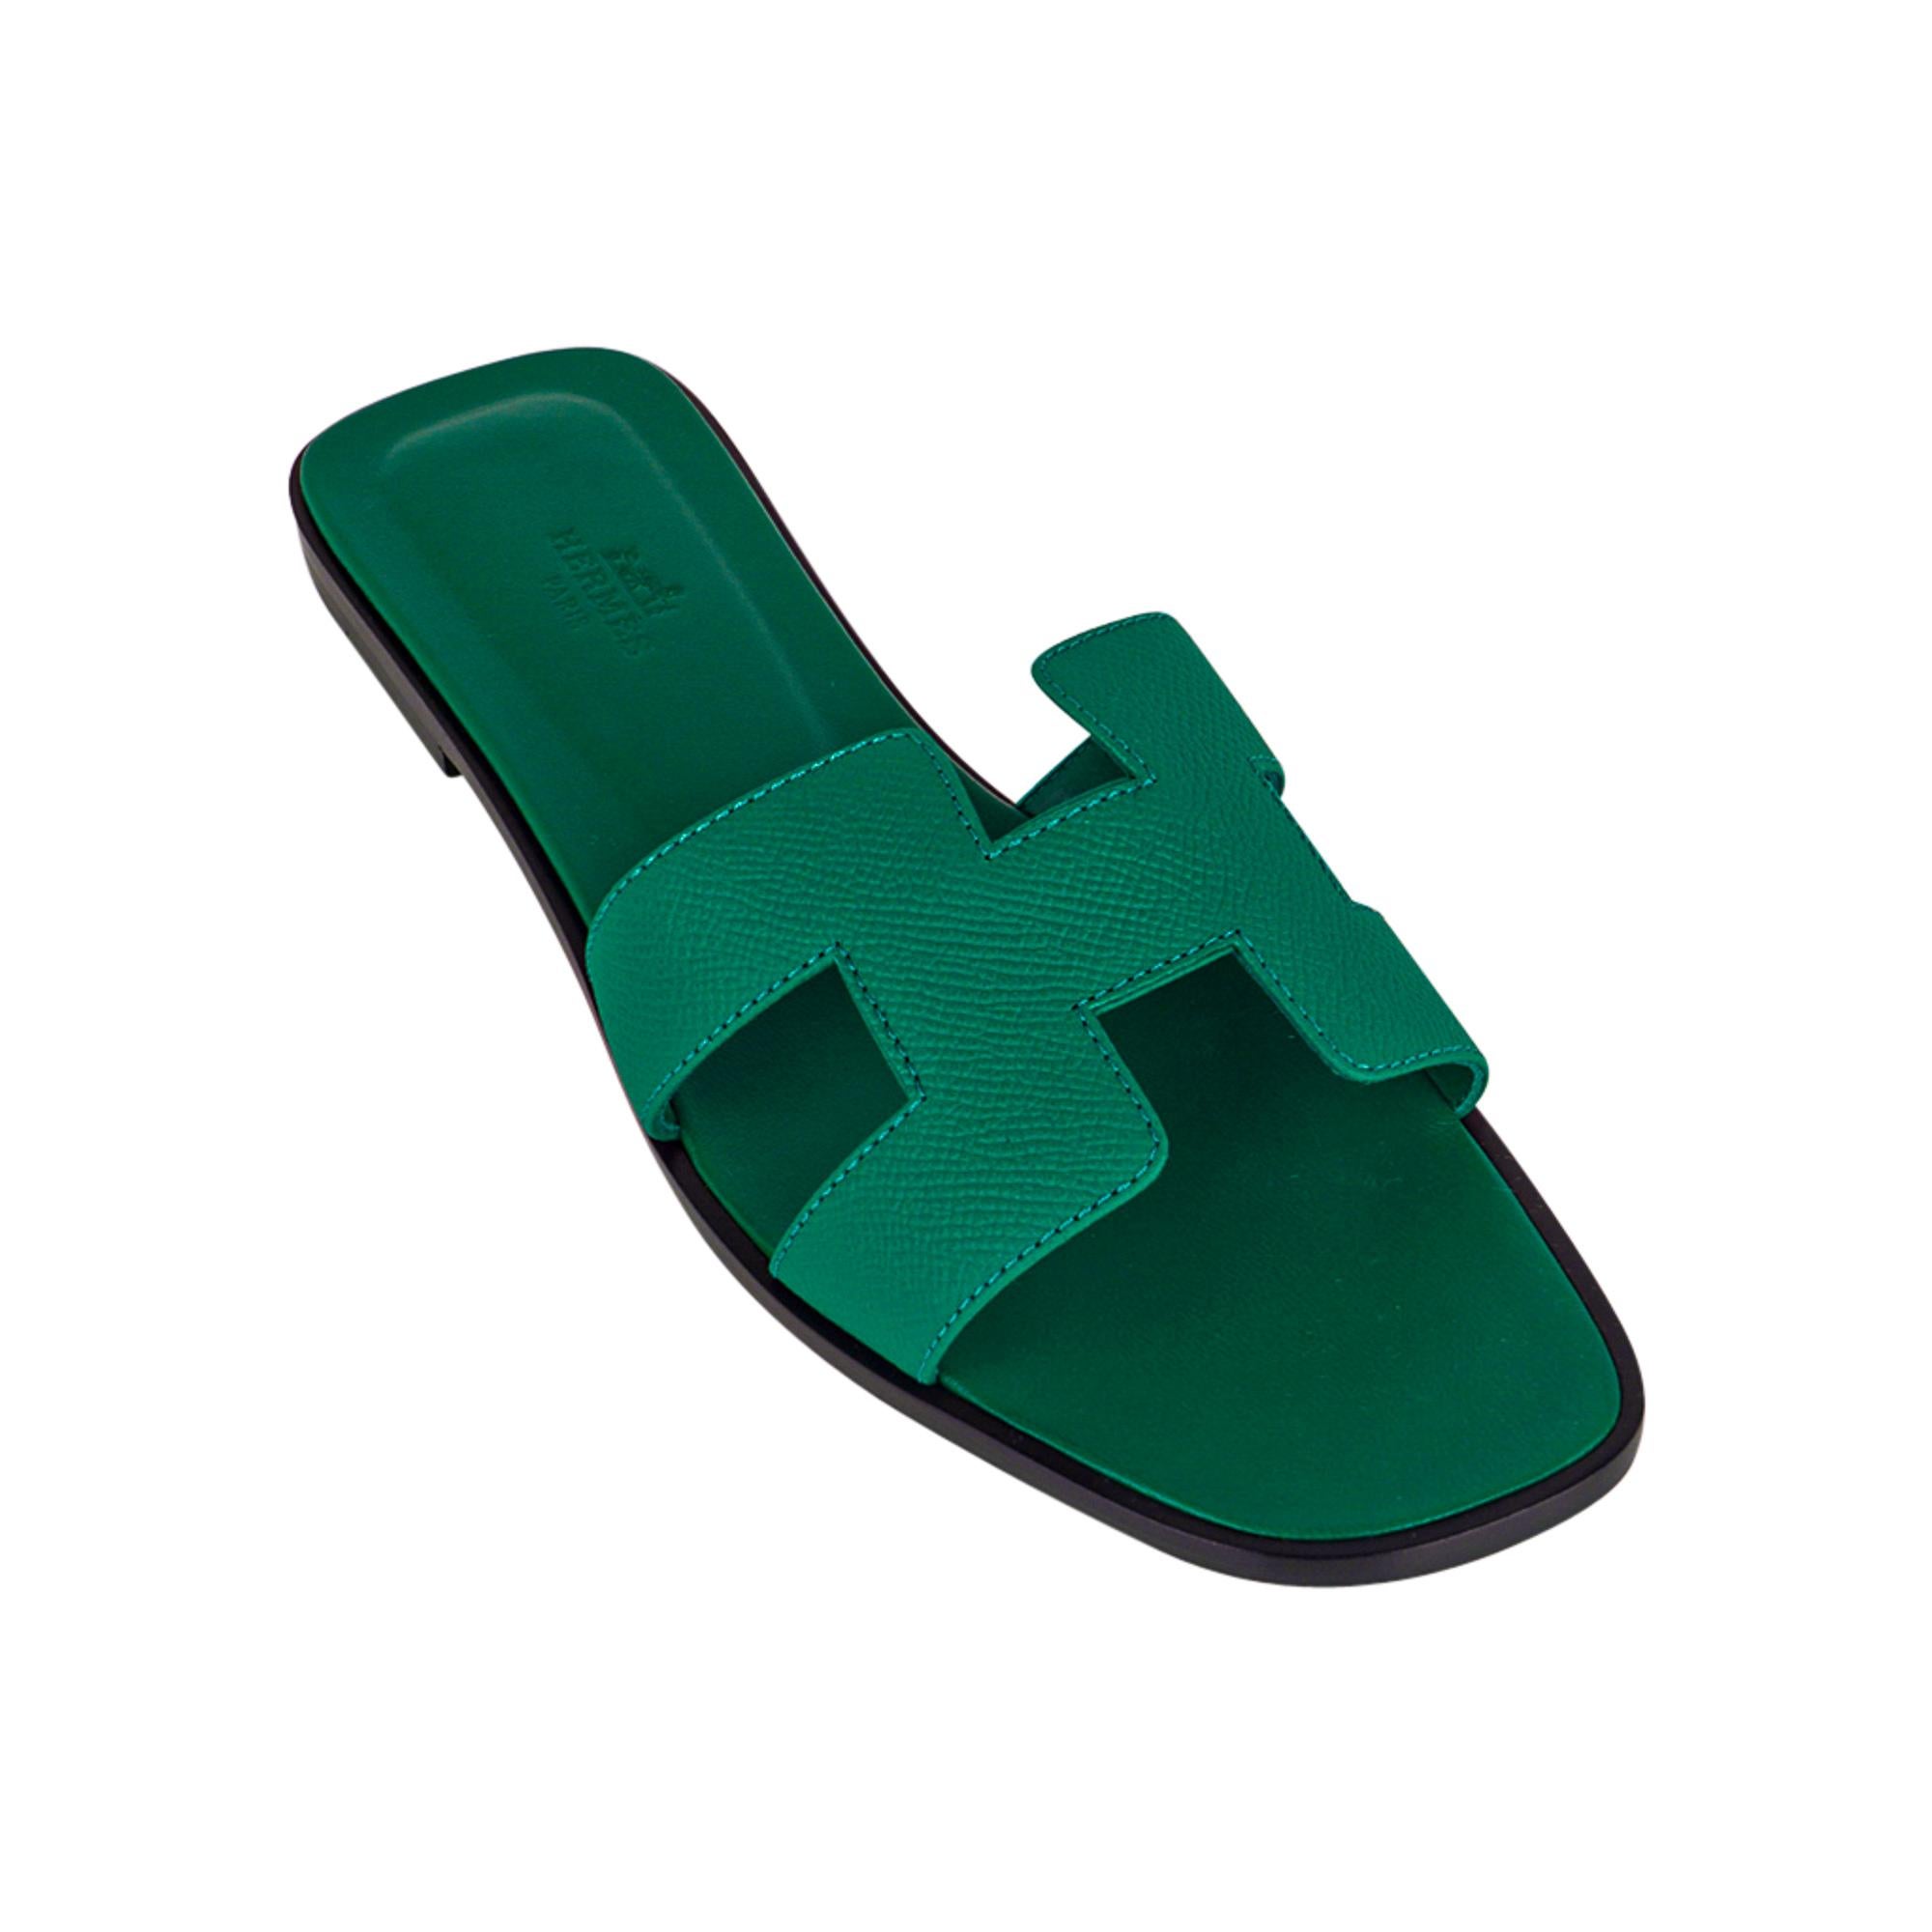 Mightychic offers guaranteed authentic Hermes Oran Emerald sandals.
This stunning limited edition Hermes Oran flat slide sandal is featured in Epsom leather.
The iconic H cutout over the top of the foot.
Emerald embossed calfskin insole.
Wood heel